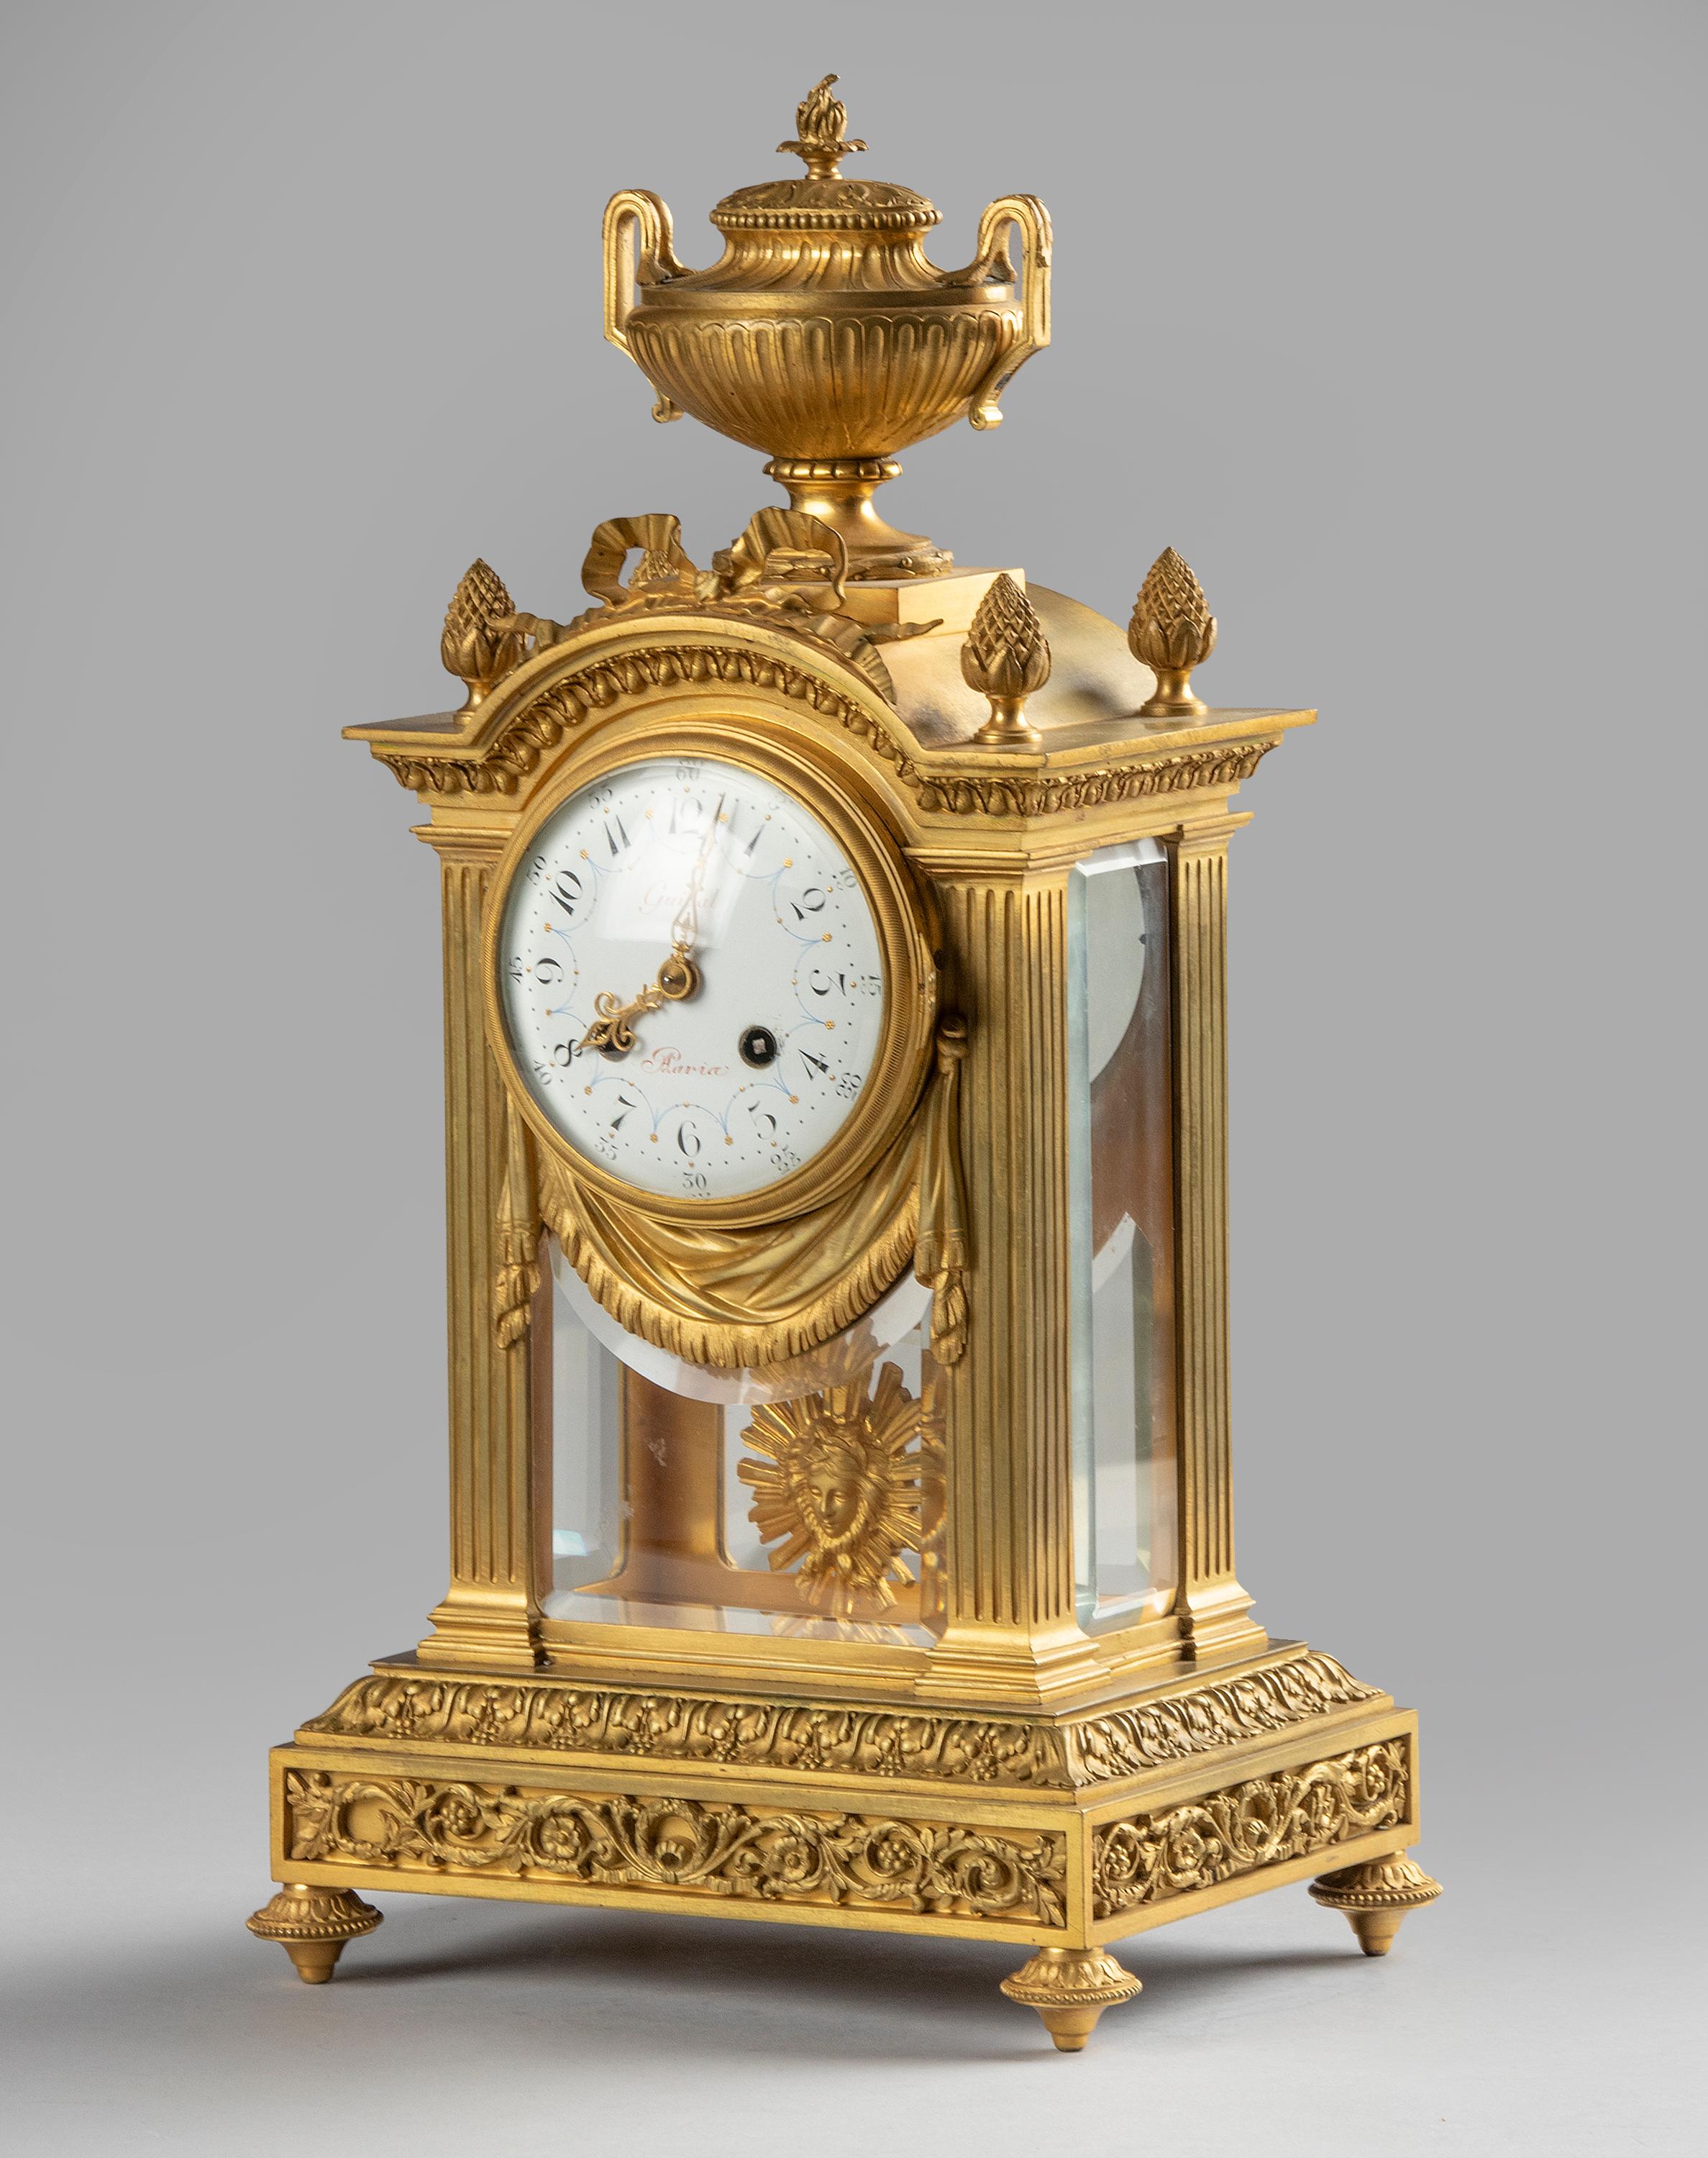 A fine Louis XVI style French mantel clock from the Napoleon III period. The clock is bronze casted and has a fire-gilded finish, the dial is enameled iron. Richly all around embellished with neoclassical ornaments such as a lidded urn at the top,